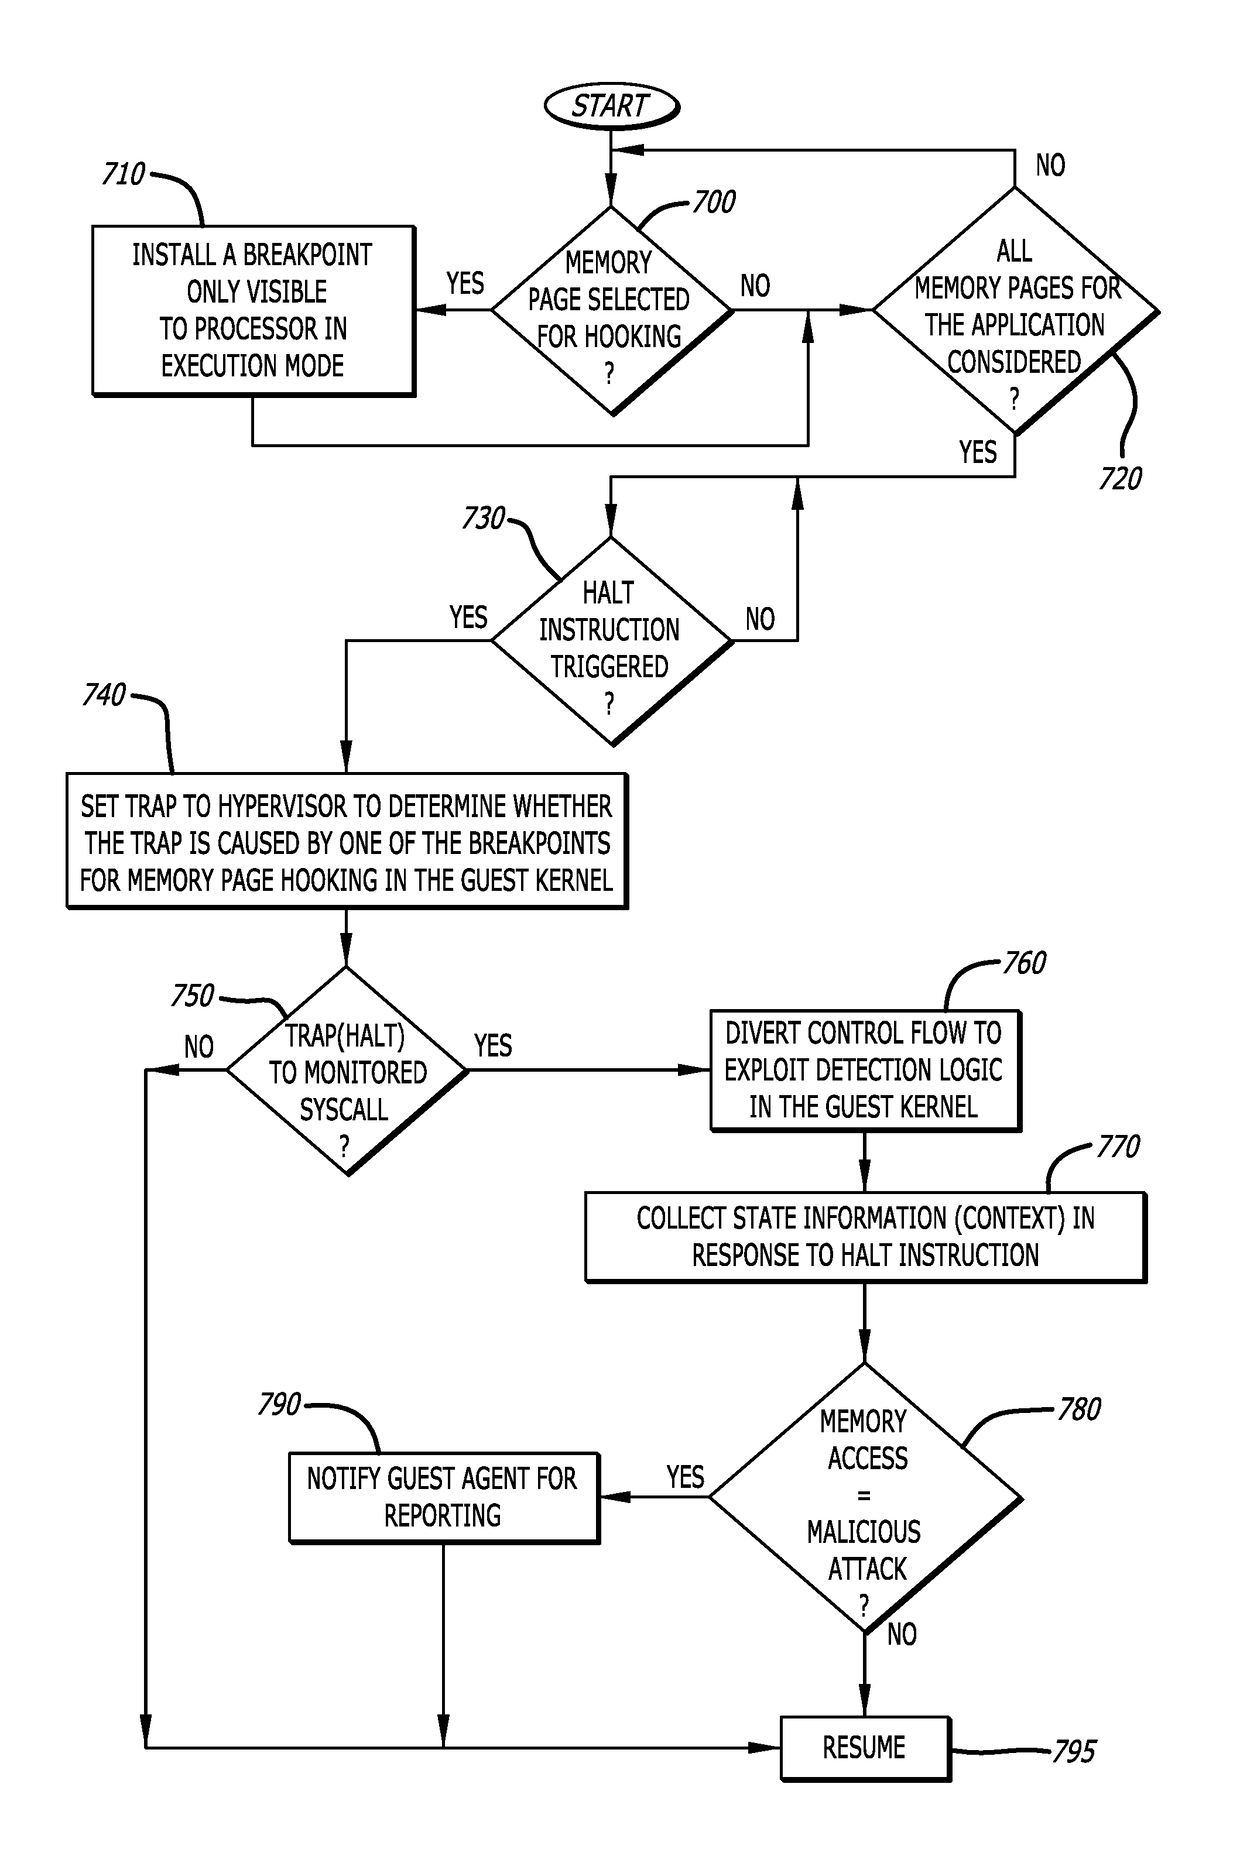 System and method of threat detection under hypervisor control